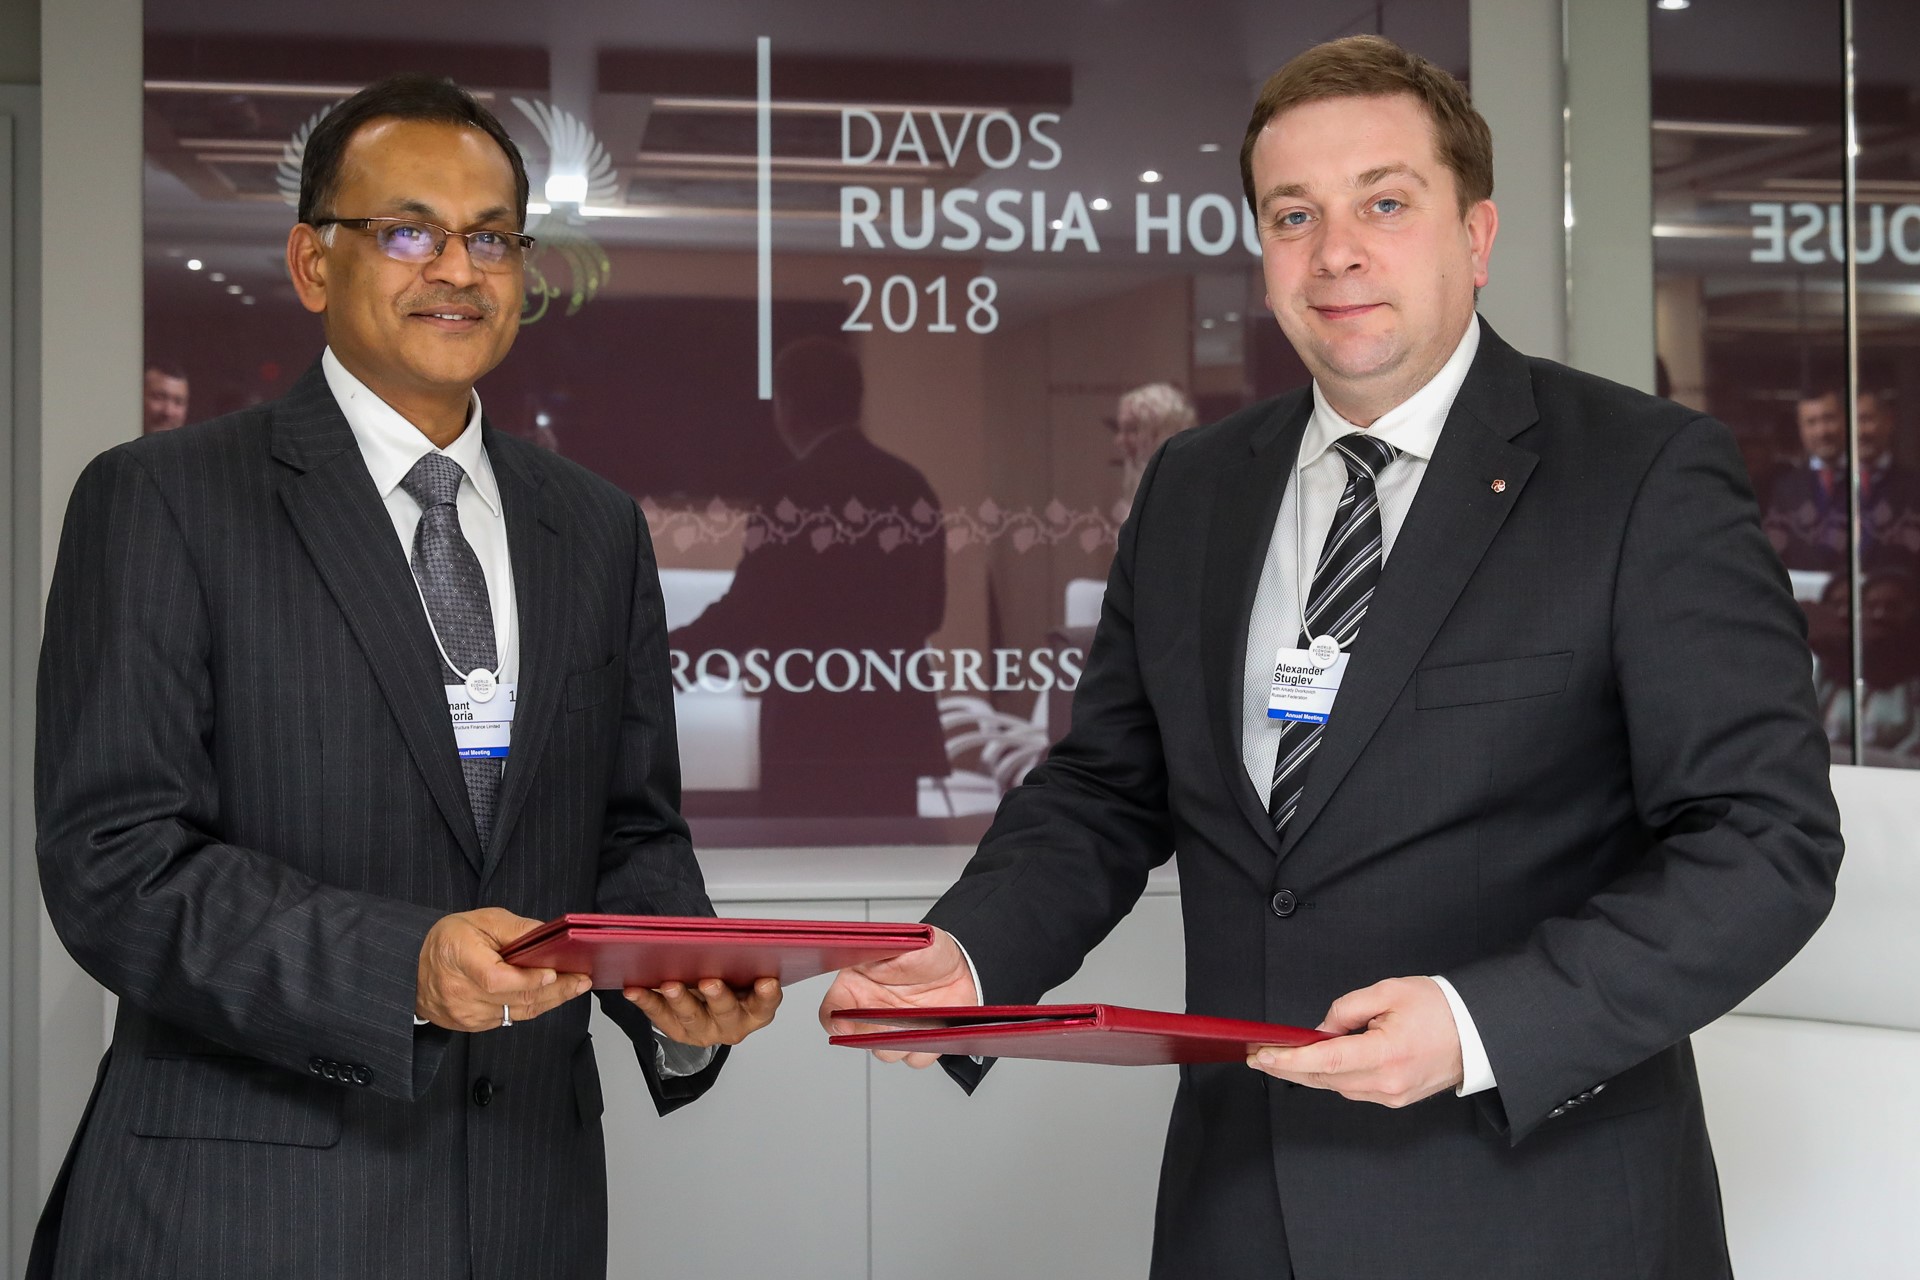 Roscongress Foundation signs agreement at Russia House in Davos